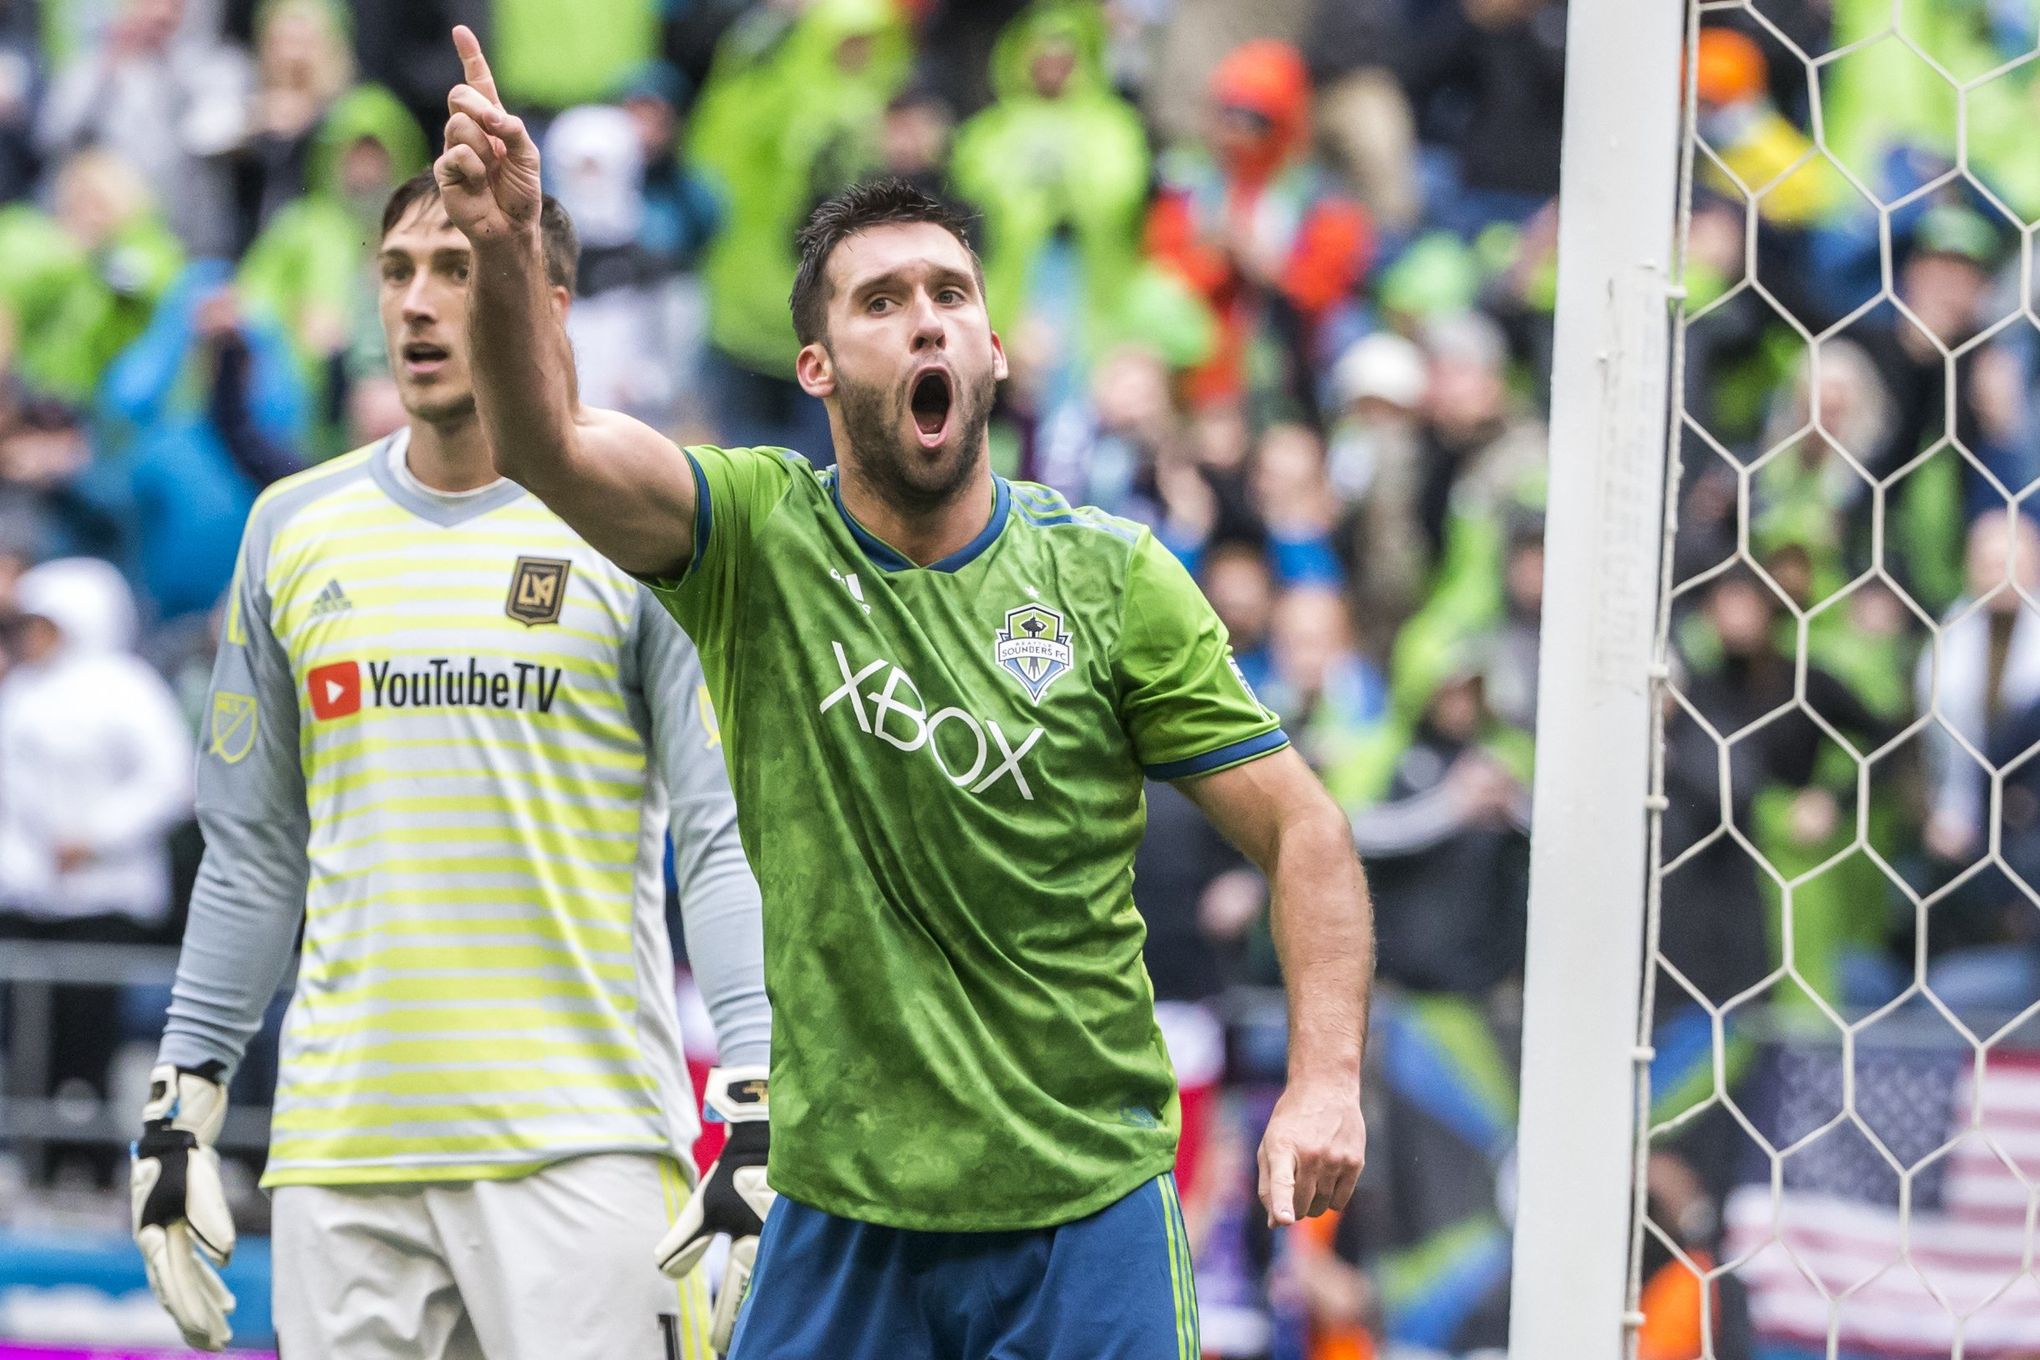 Sounders schedule 101 How to make sense of the chaos The Seattle Times